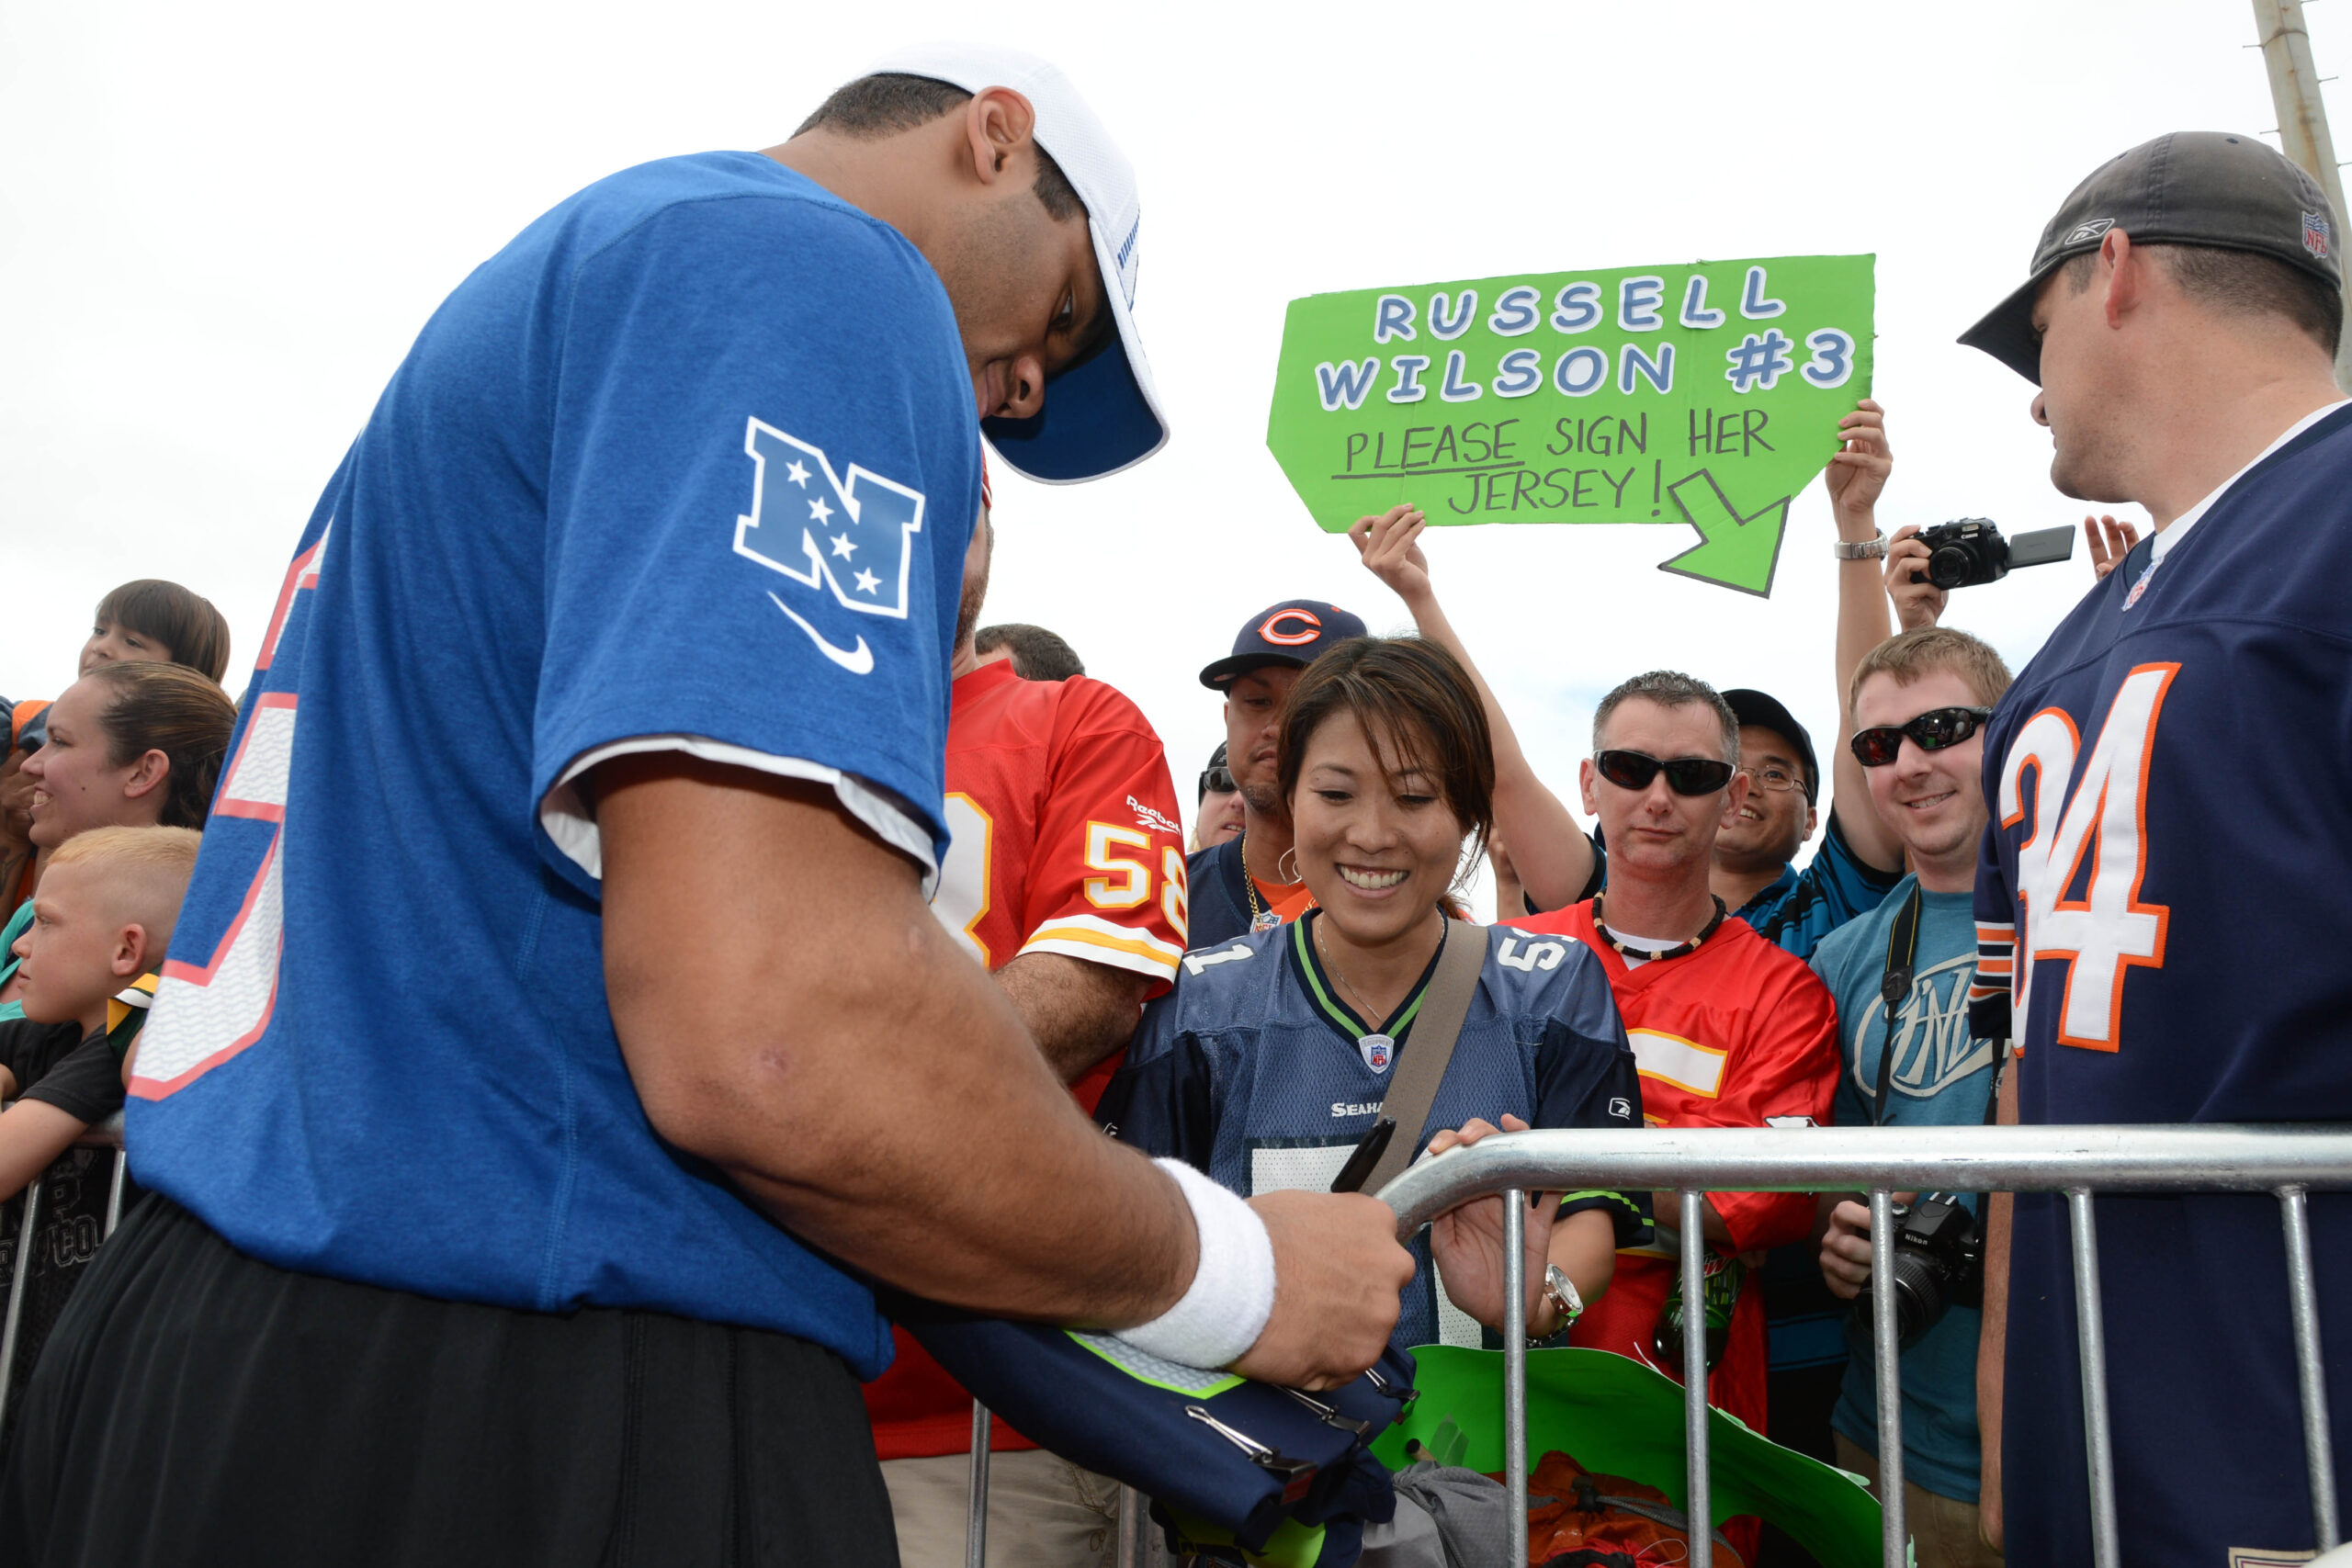 NFC quarterback Russell Wilson of the Seattle Seahawks (3, left) autographs a jersey for Erin Furukawa (center), from Hawaii, during practice for the 2013 Pro Bowl at Joint Base Pearl Harbor-Hickam.